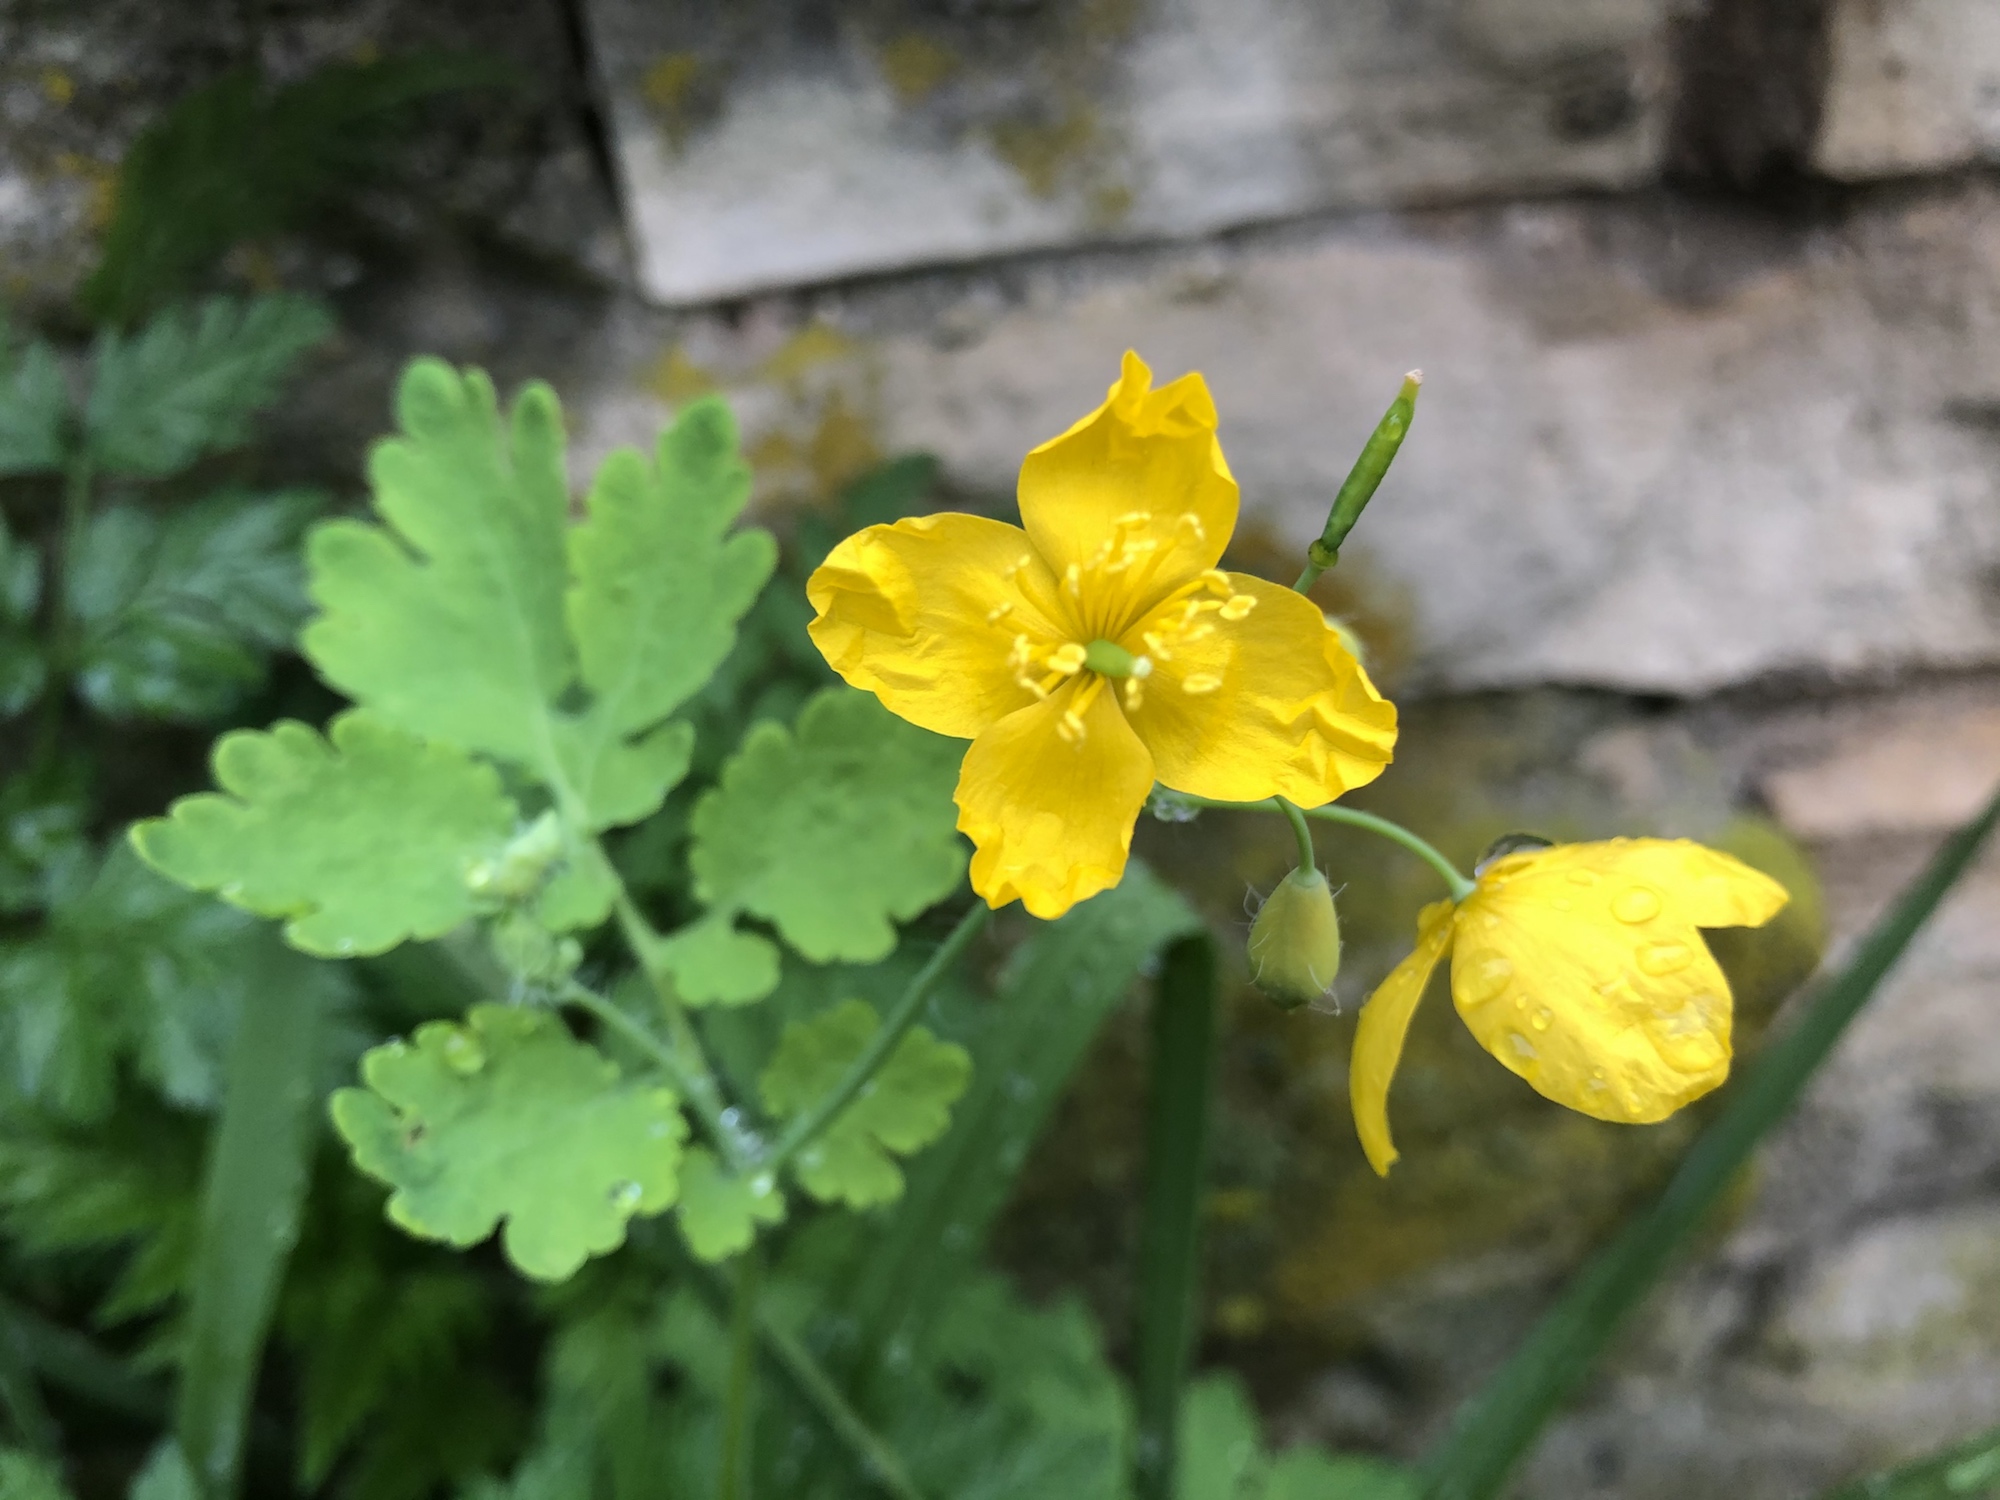 Greater Celandine by Duck Pond in Madison, Wisconsin on May 19, 2020.